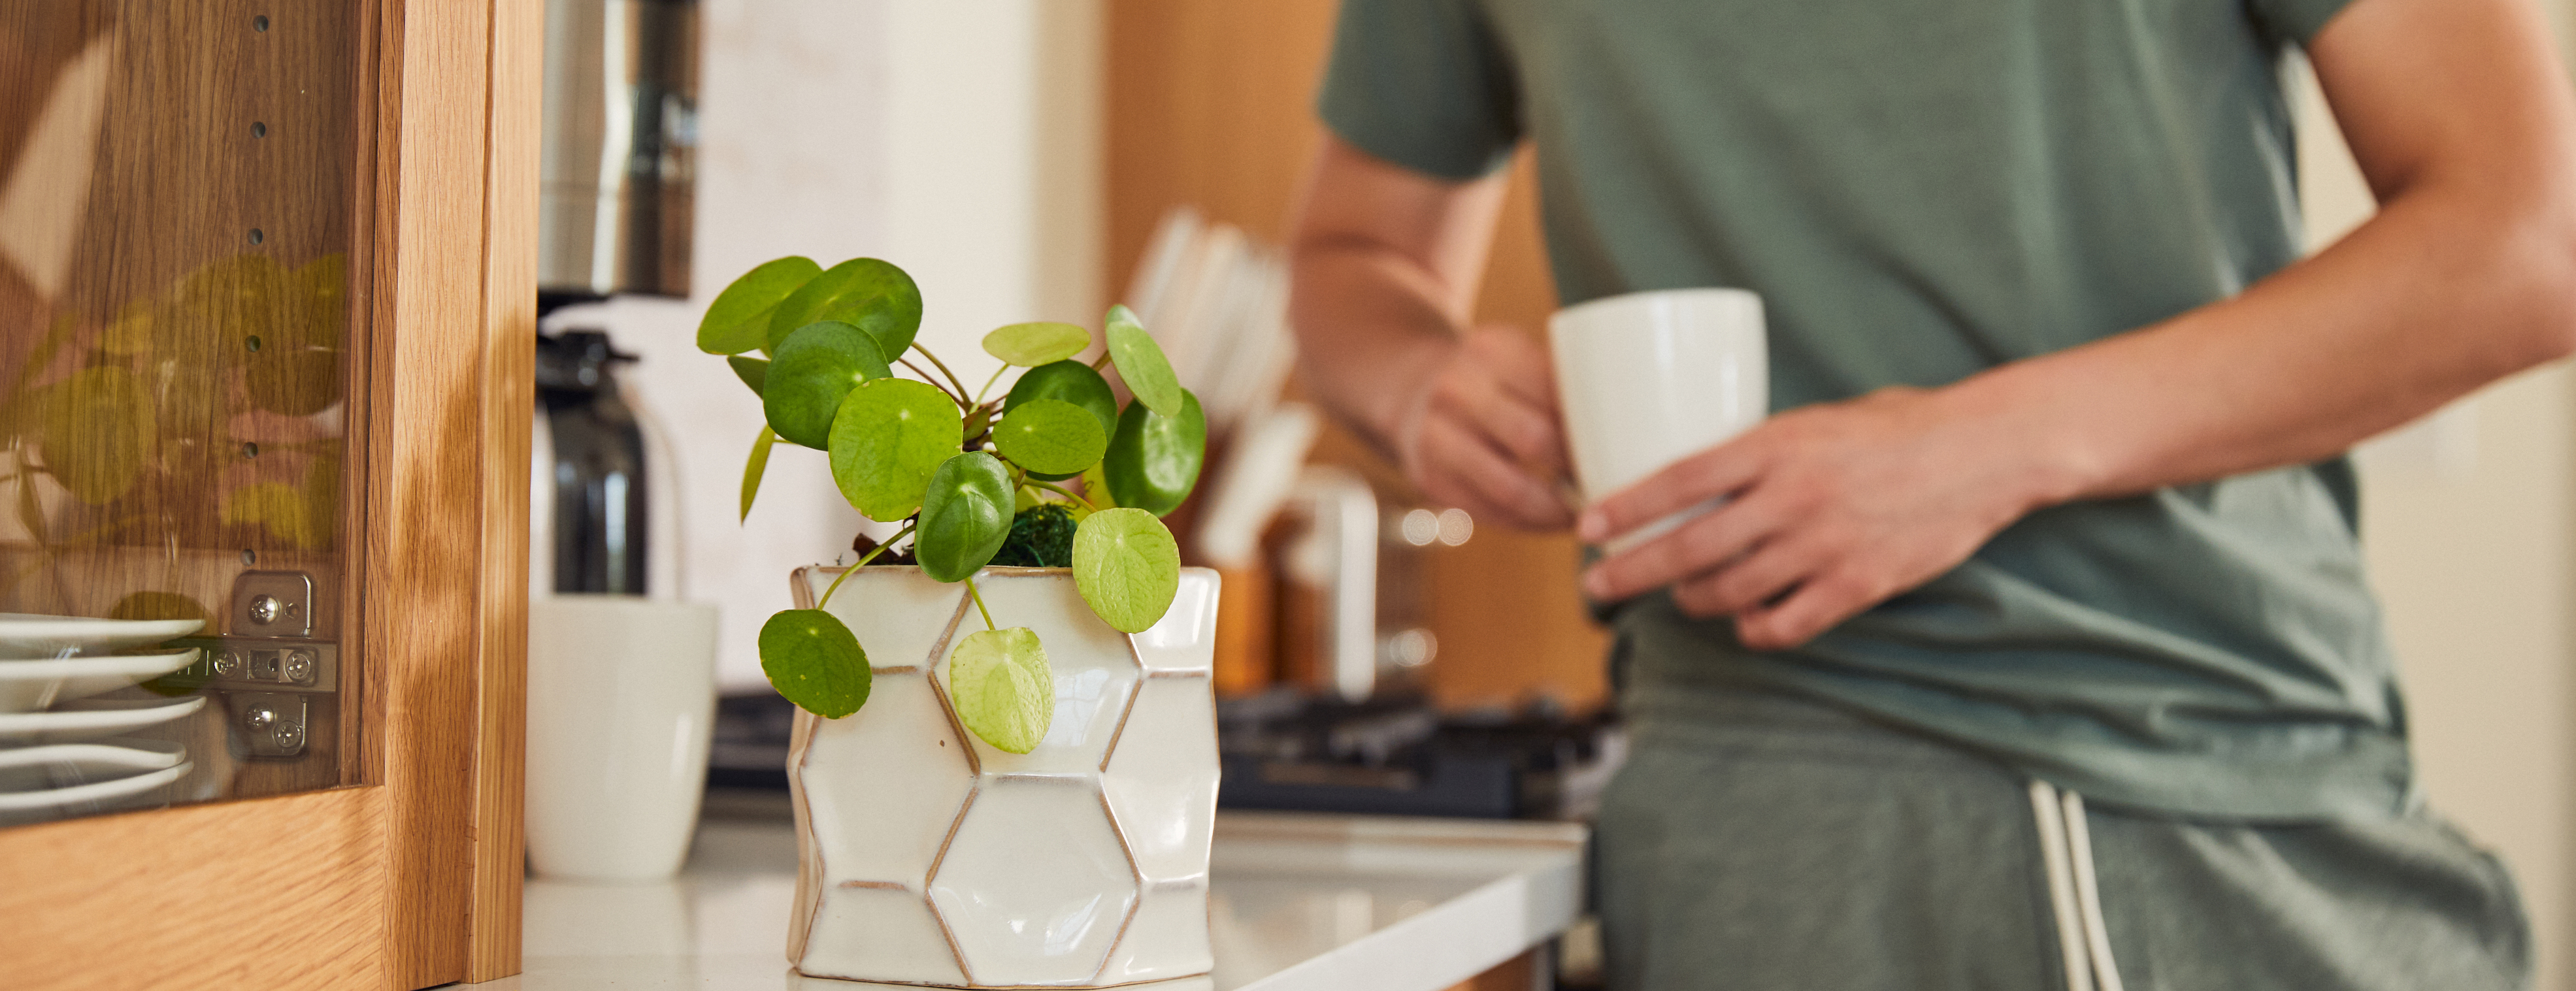 Man leaning on counter with Chinese money plant